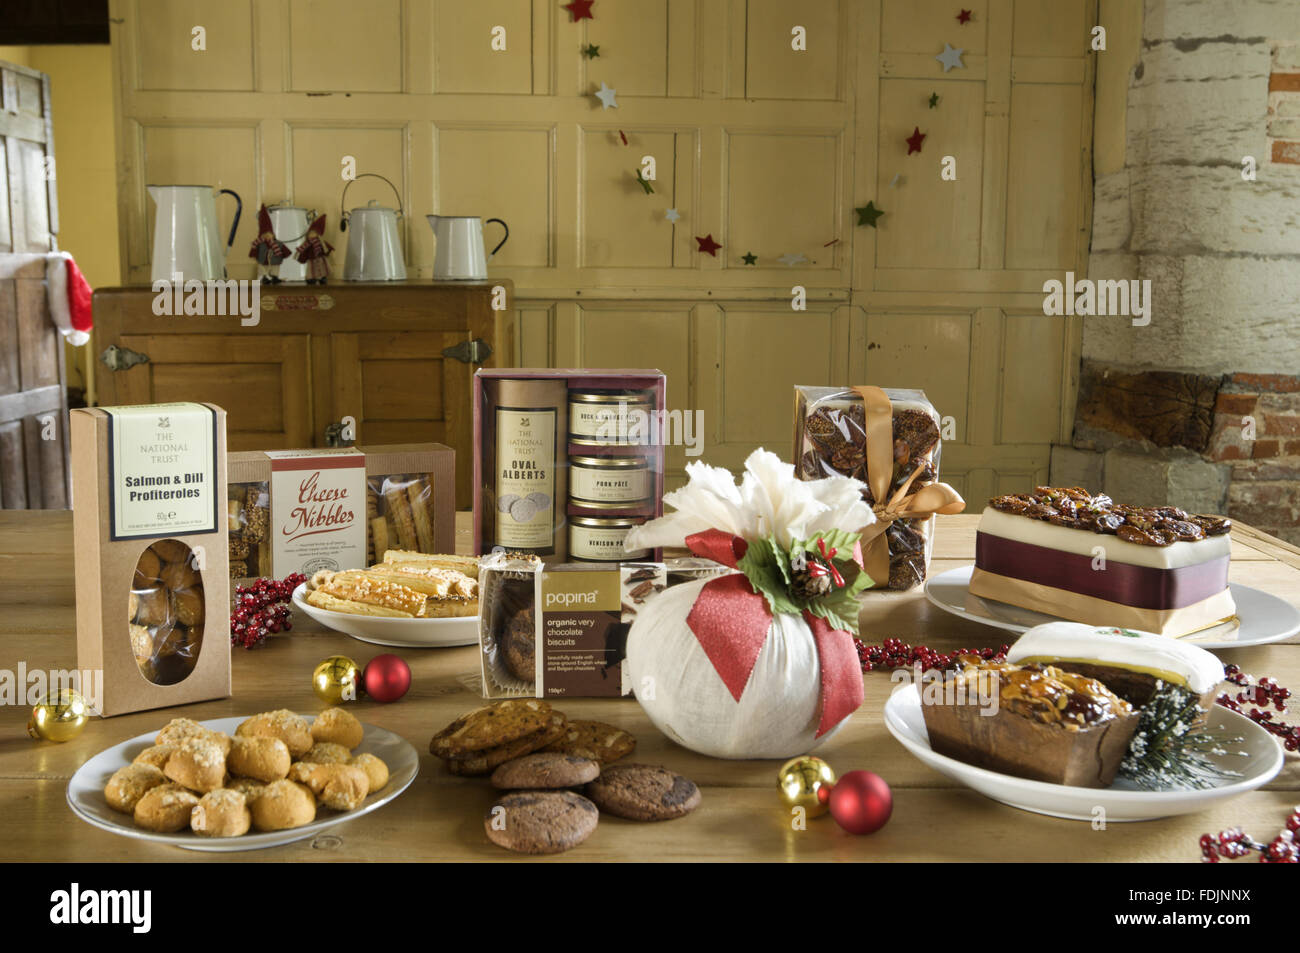 A range of Christmas foods and gifts including cakes and a pudding. Stock Photo